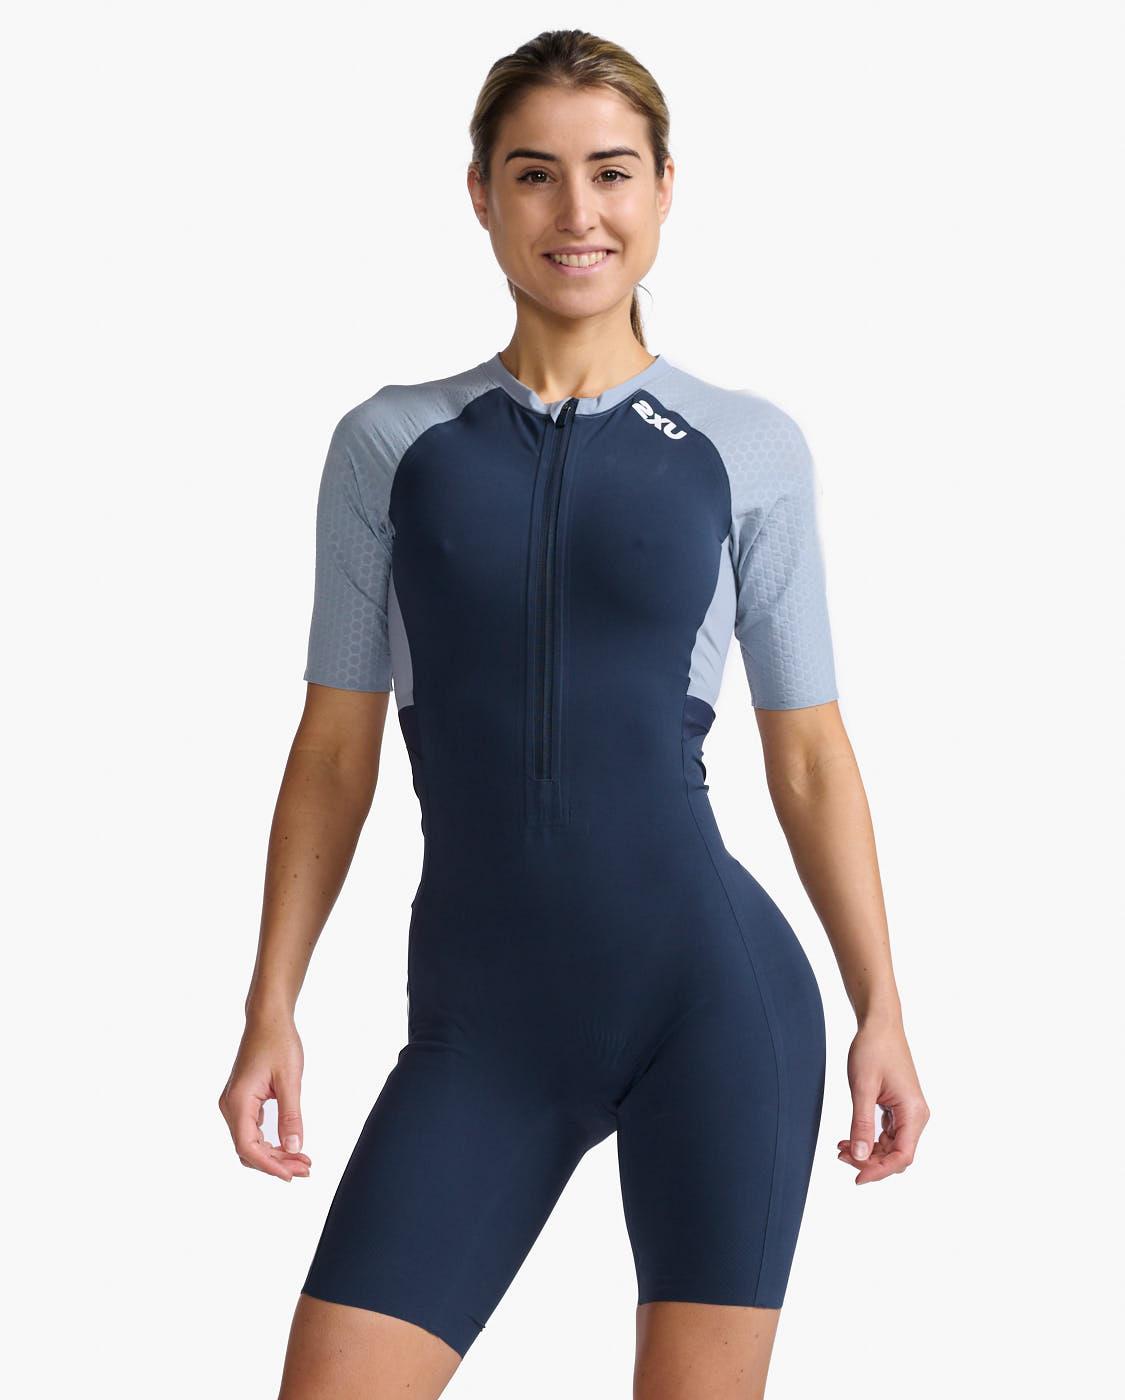 2xu Womens Compression Light Speed Sleeved Trisuit - Outerspace/white